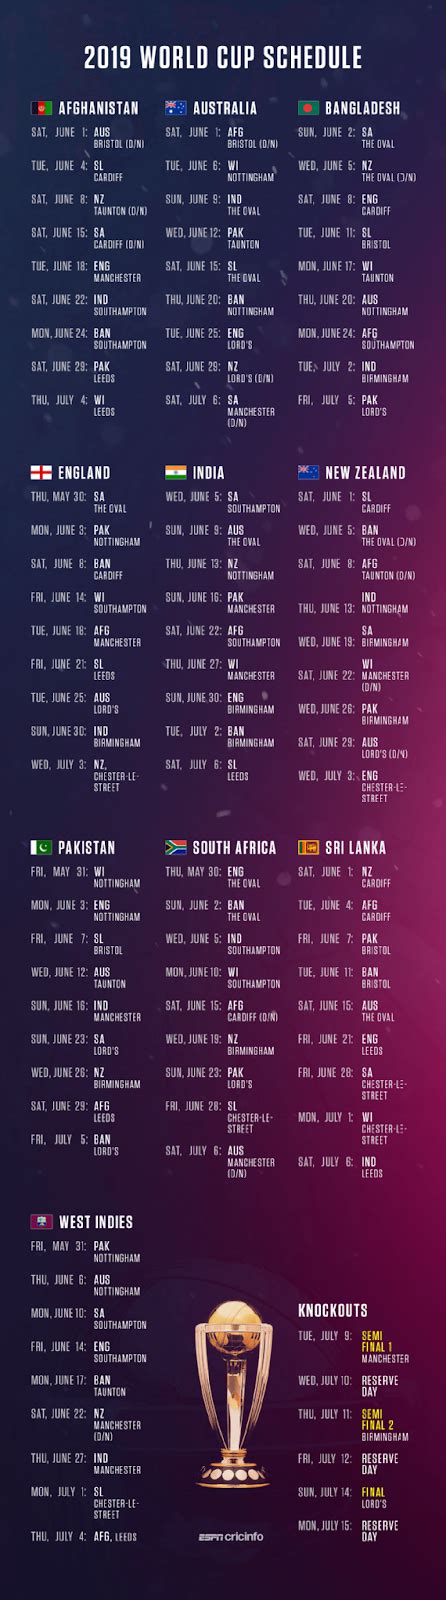 The headline news to take away from the calendar is that there will be 11 stops across three. ICC Cricket World Cup 2019 Schedule Photos | World Cup ...